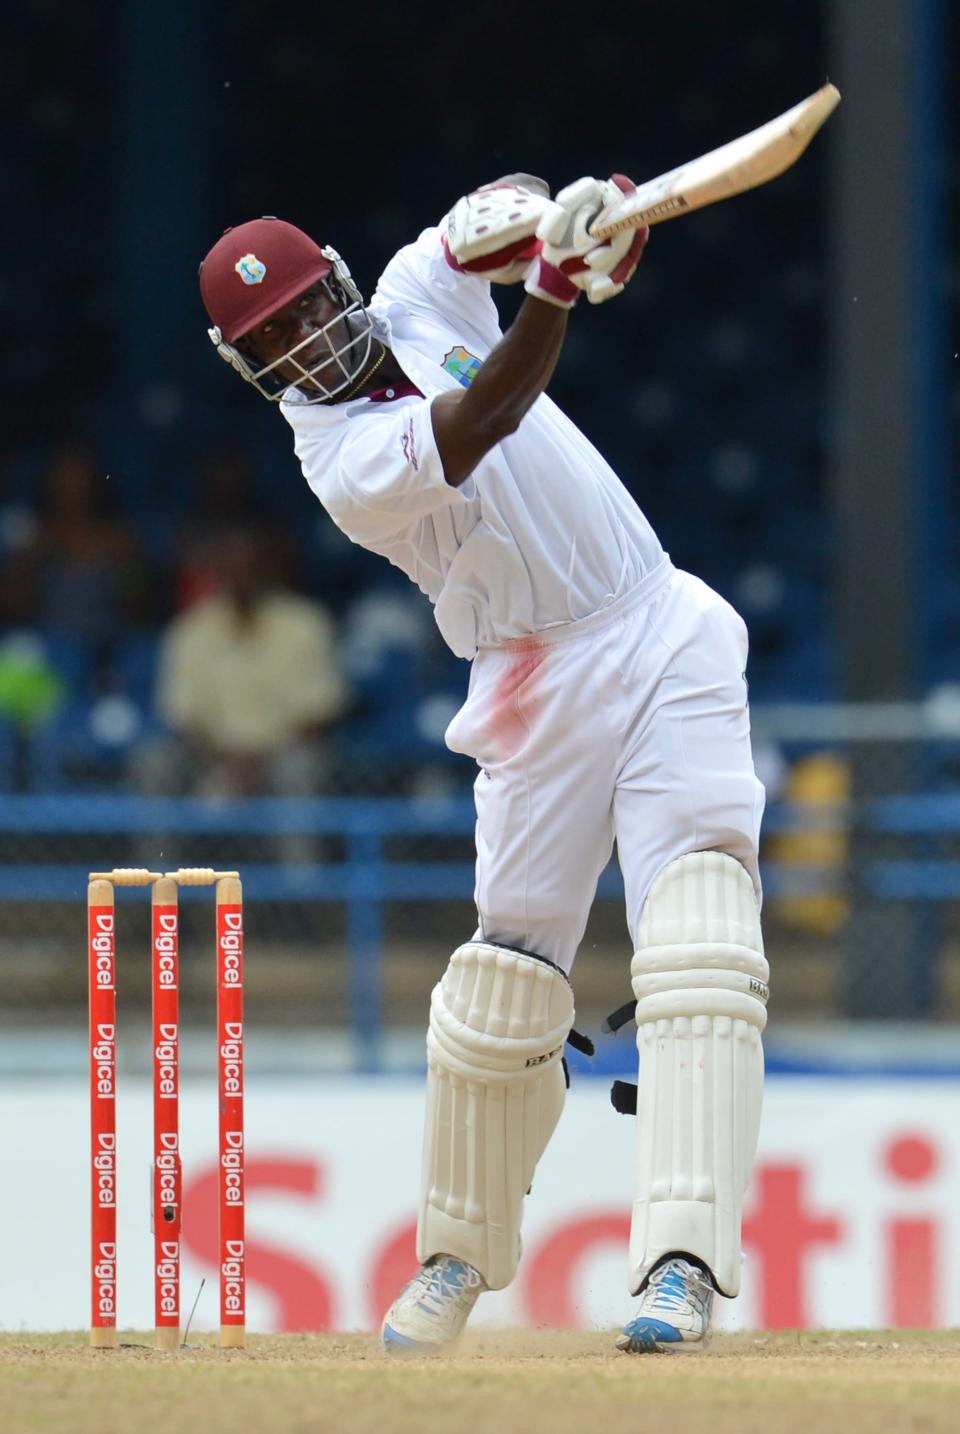 West Indies Darren Sammy launches a six off Australian bowler Ben Hilfenhaus during the final day of the second-of-three Test matches between Australia and West Indies April 19, 2012 at Queen's Park Oval in Port of Spain, Trinidad.